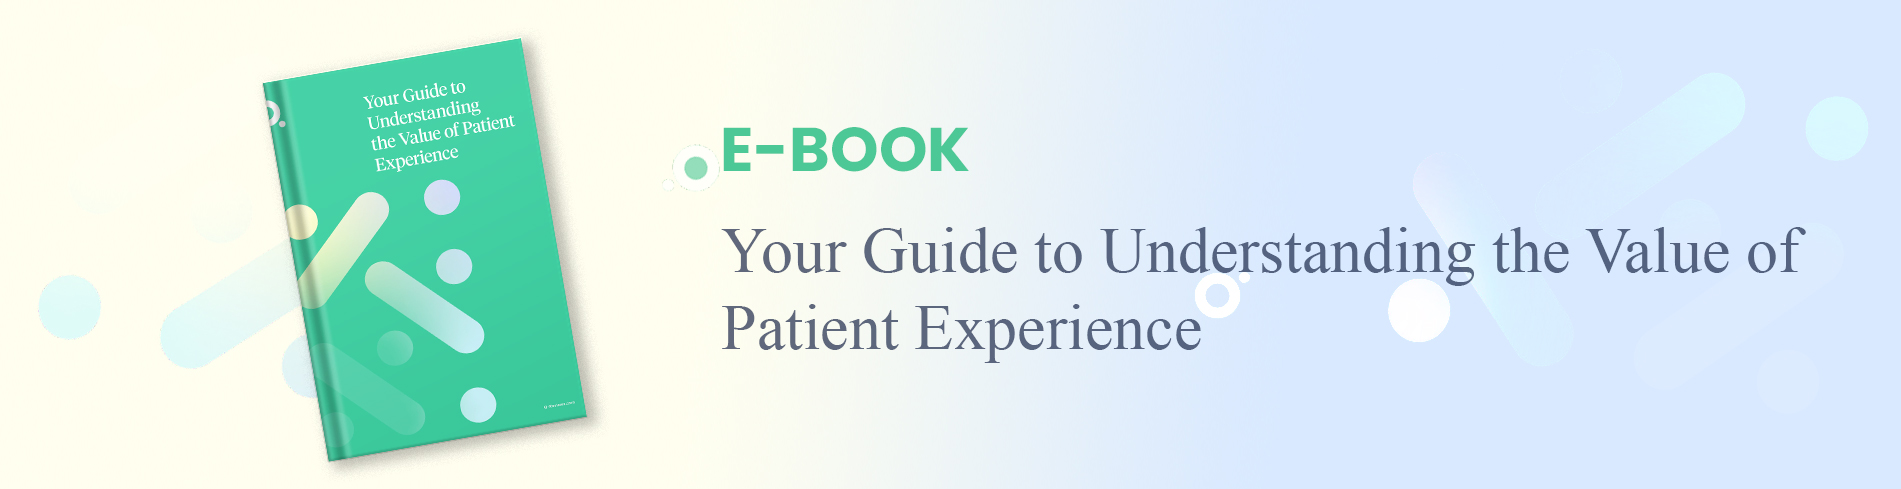 <sup>E-Book</sup><br>Your Guide to Understanding the Value of Patient Experience